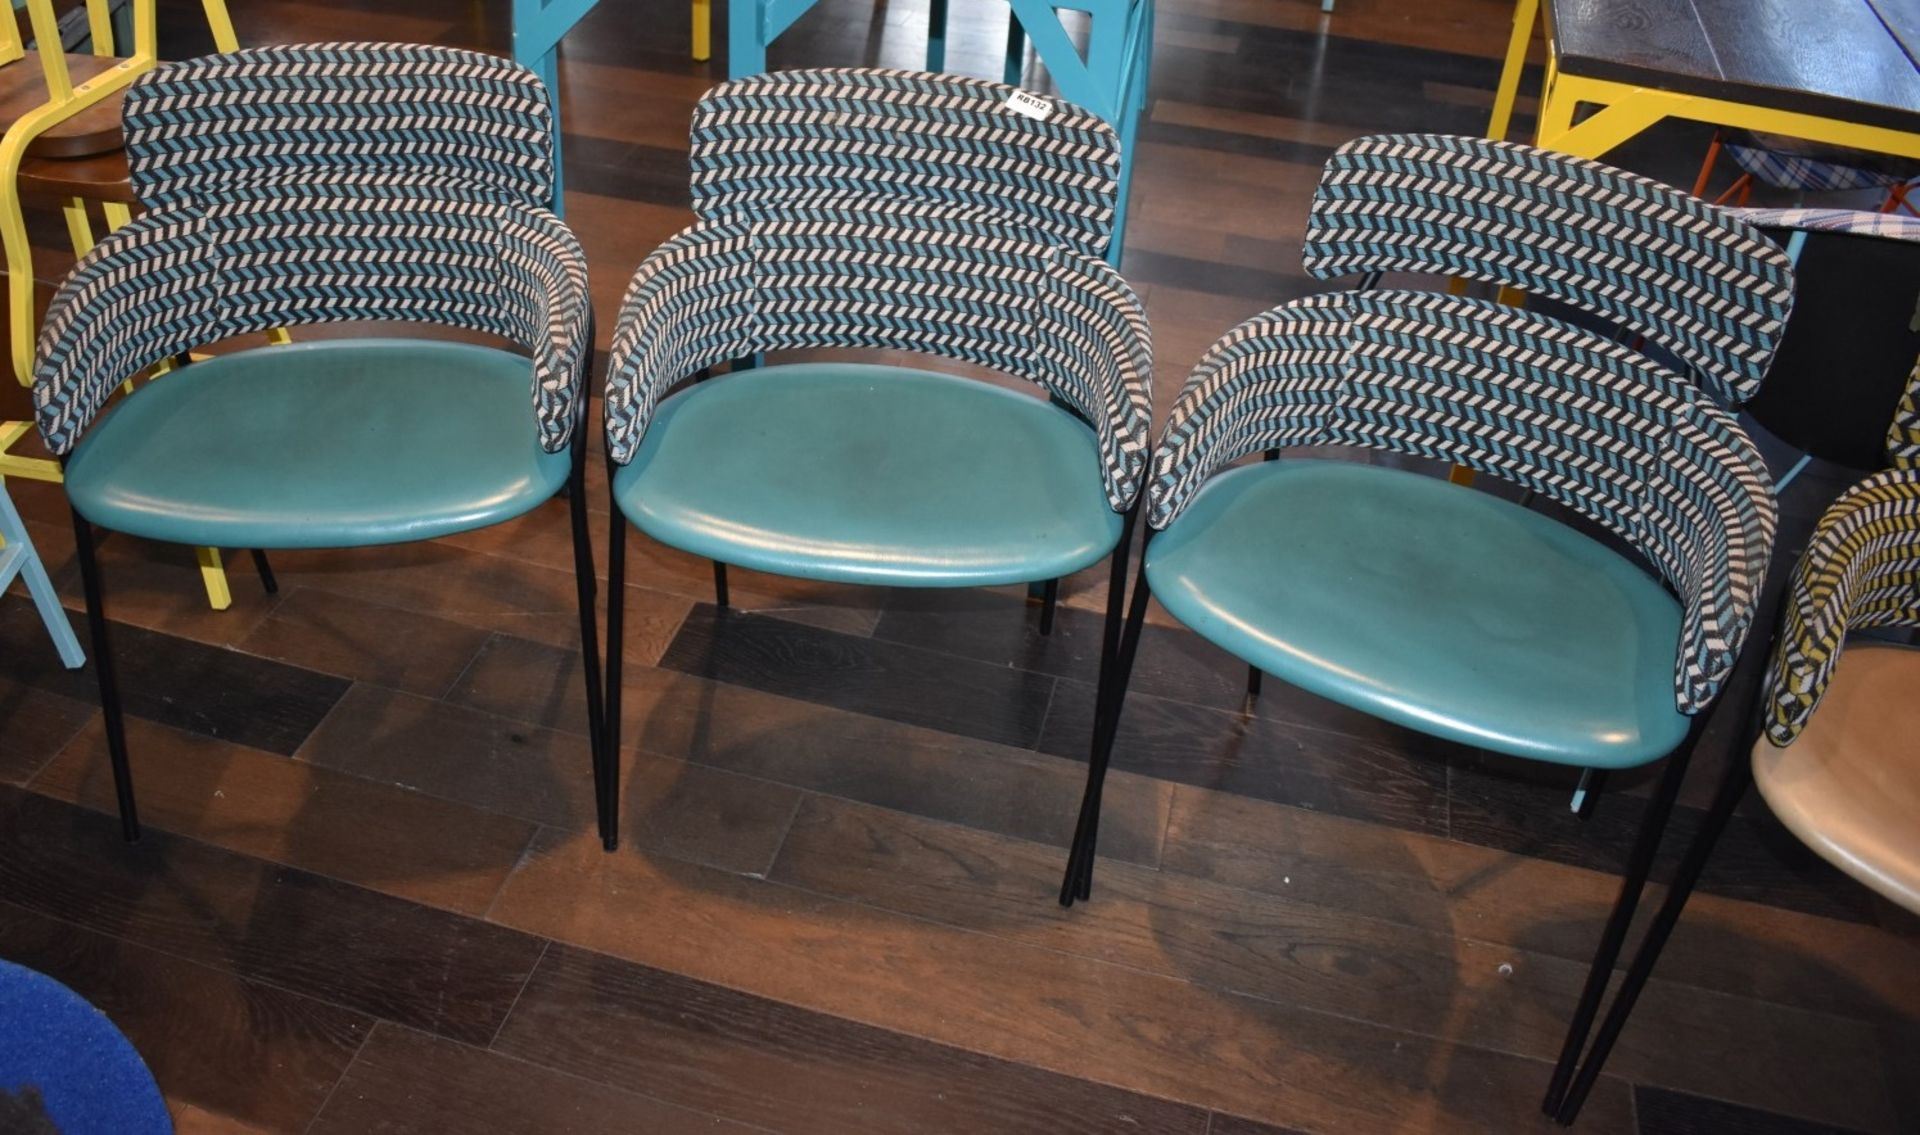 6 x Designer Debi Strike Dining Chairs - Made in Italy - RRP £2,400 - Ref: RB132 - CL558 - Location: - Image 8 of 12